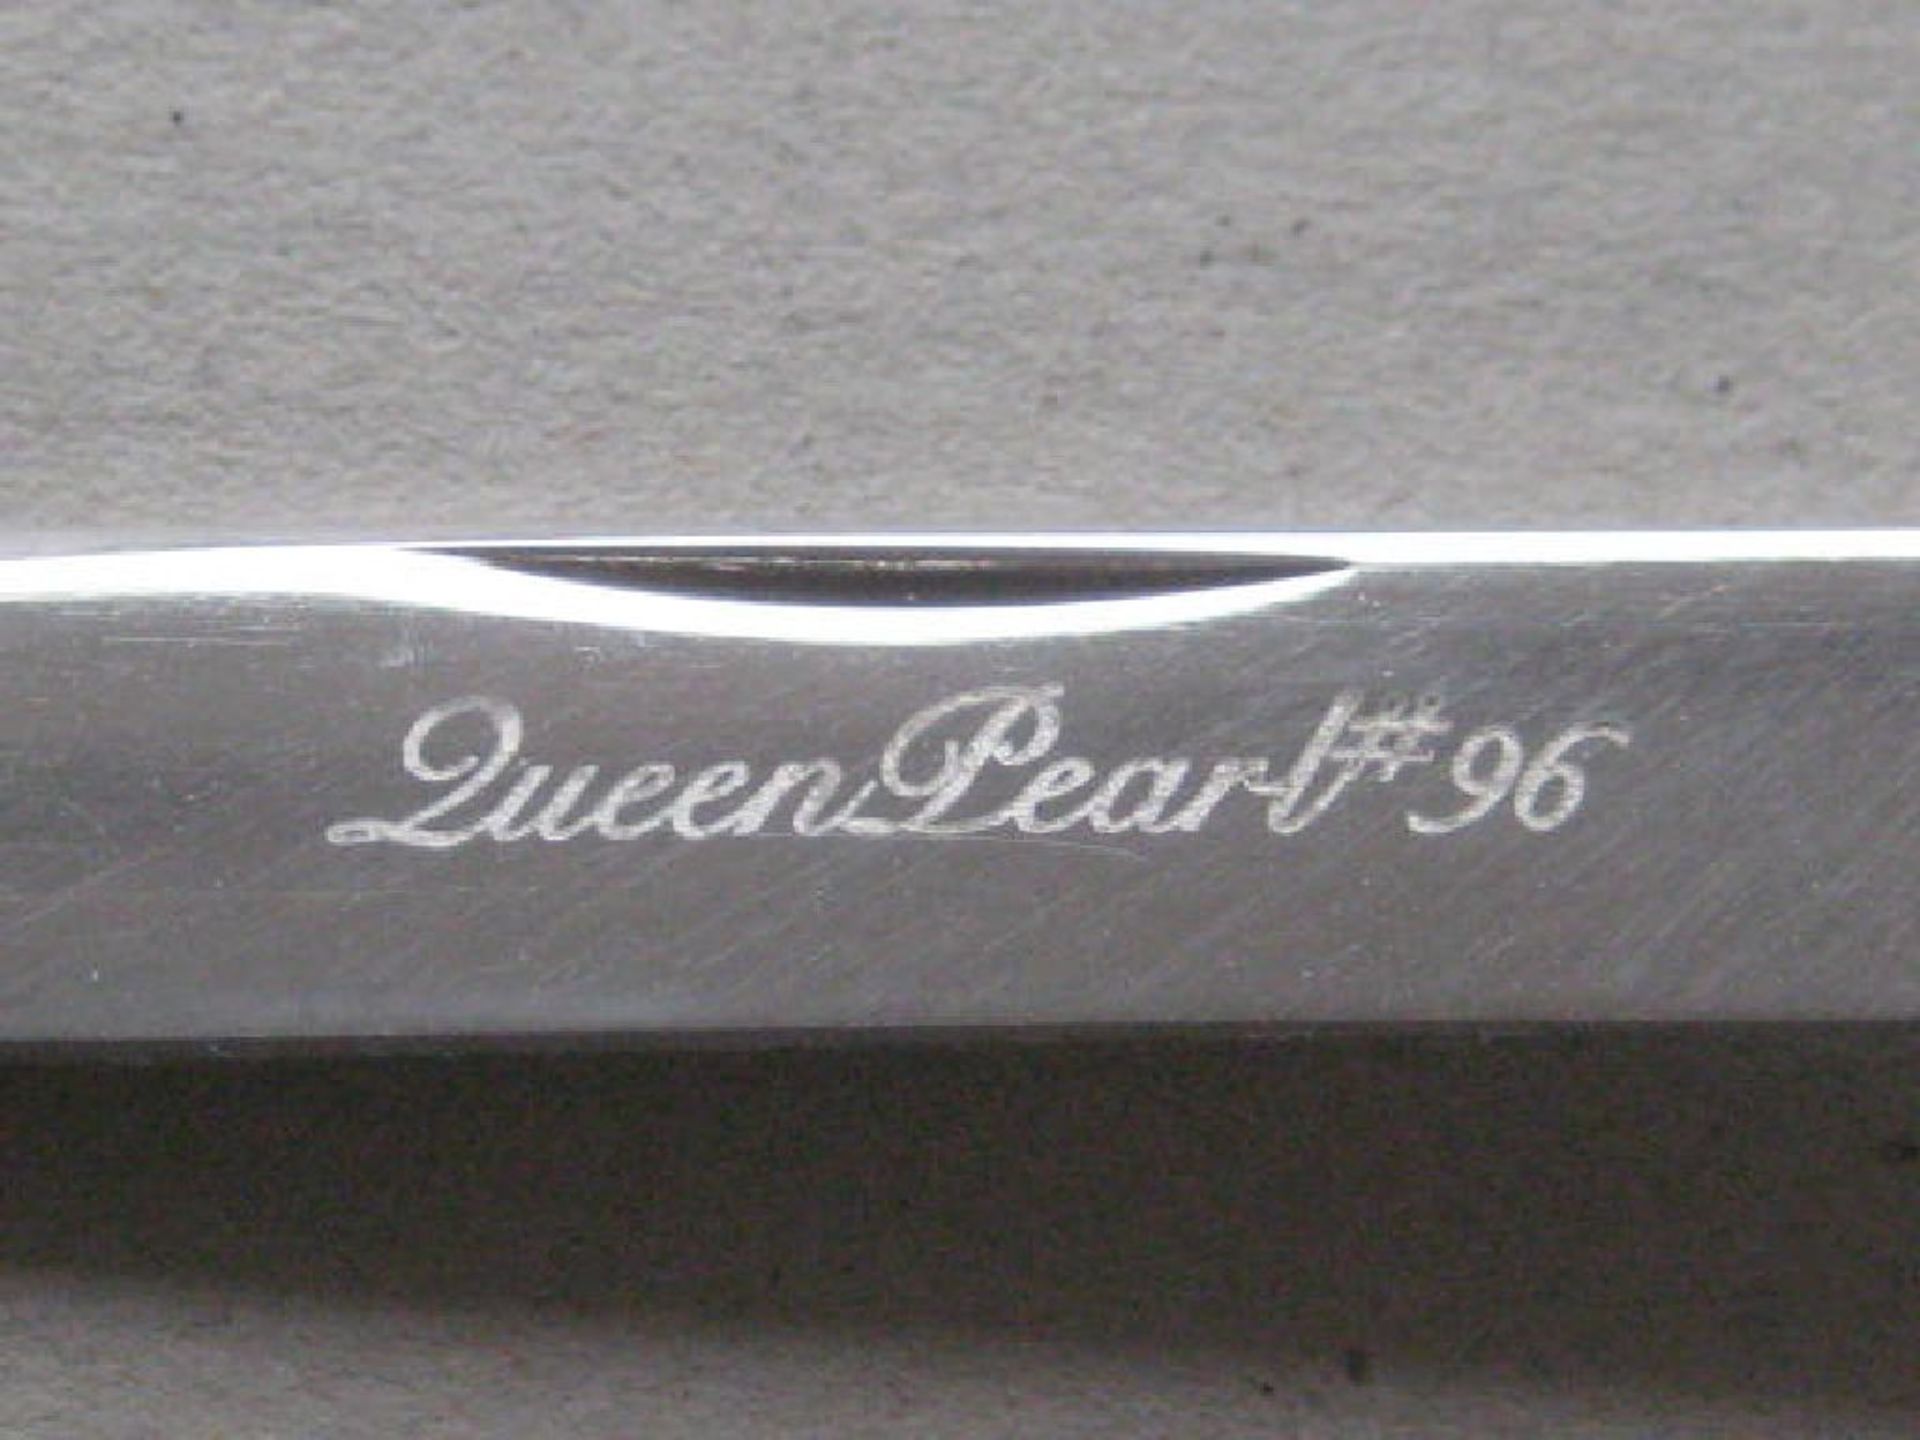 Vintage American Mother of Pearl Hafted Queen Pearl 96 Penknife - Image 4 of 9